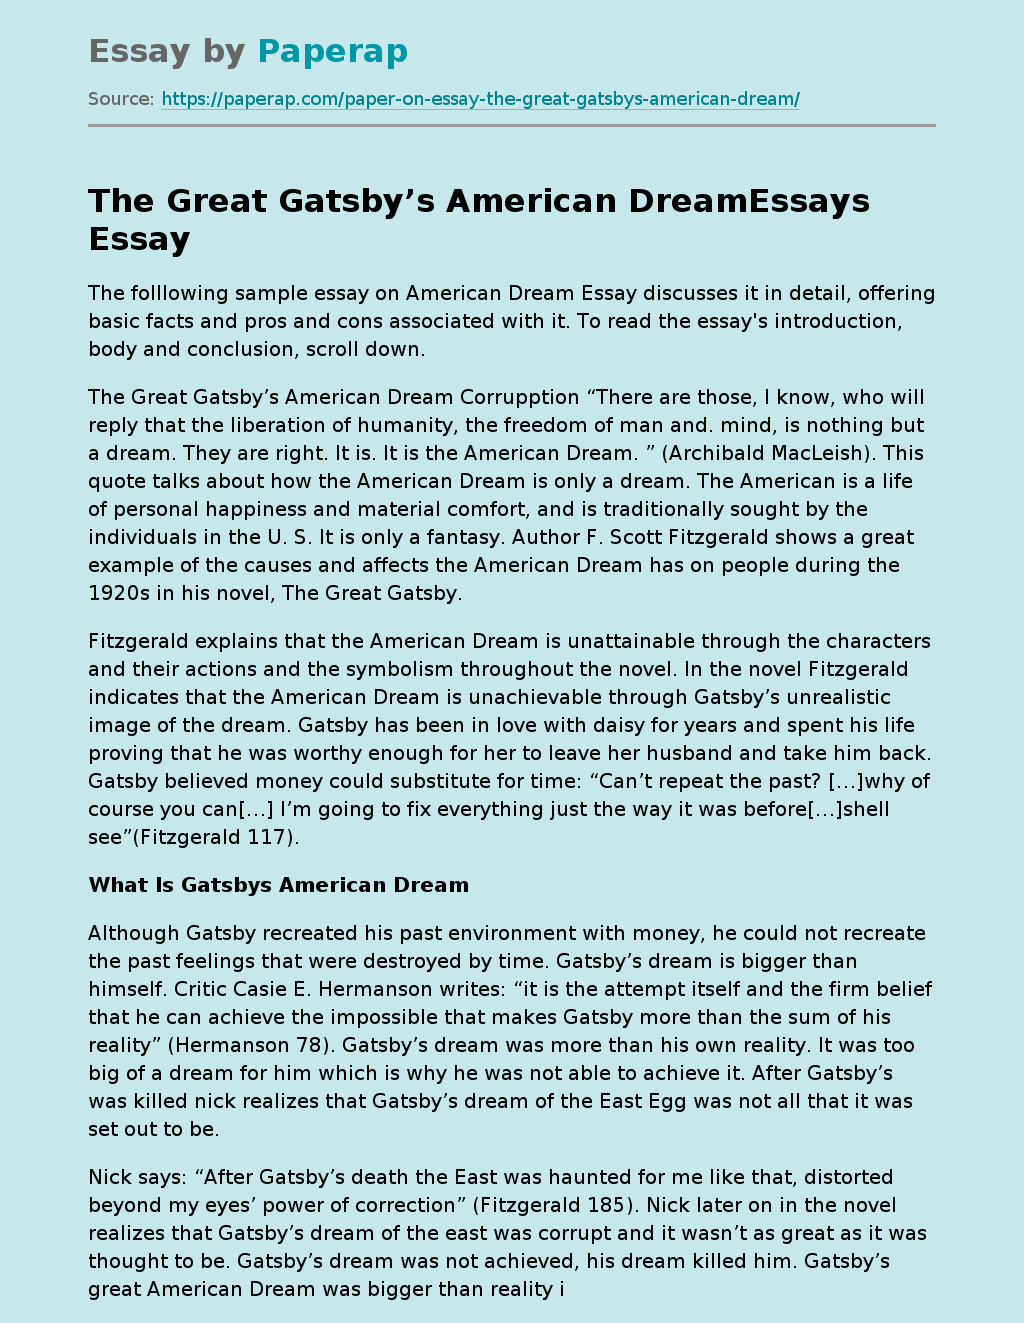 The Great Gatsby’s American DreamEssays